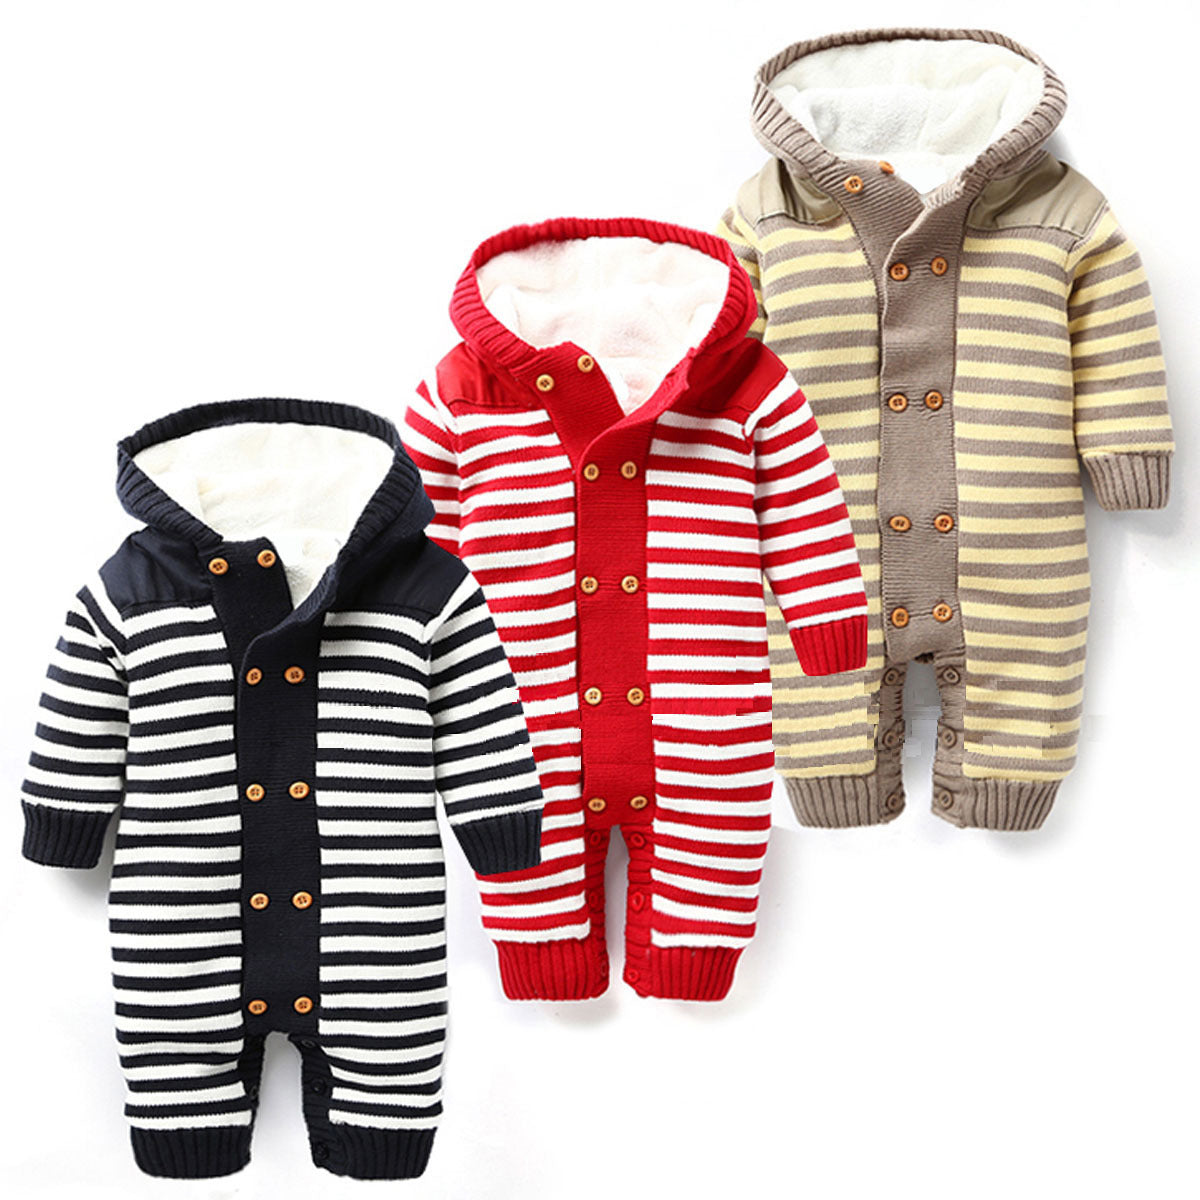 Baby Jumpsuit: Stylish and Comfortable One-Piece Outfit for Infants